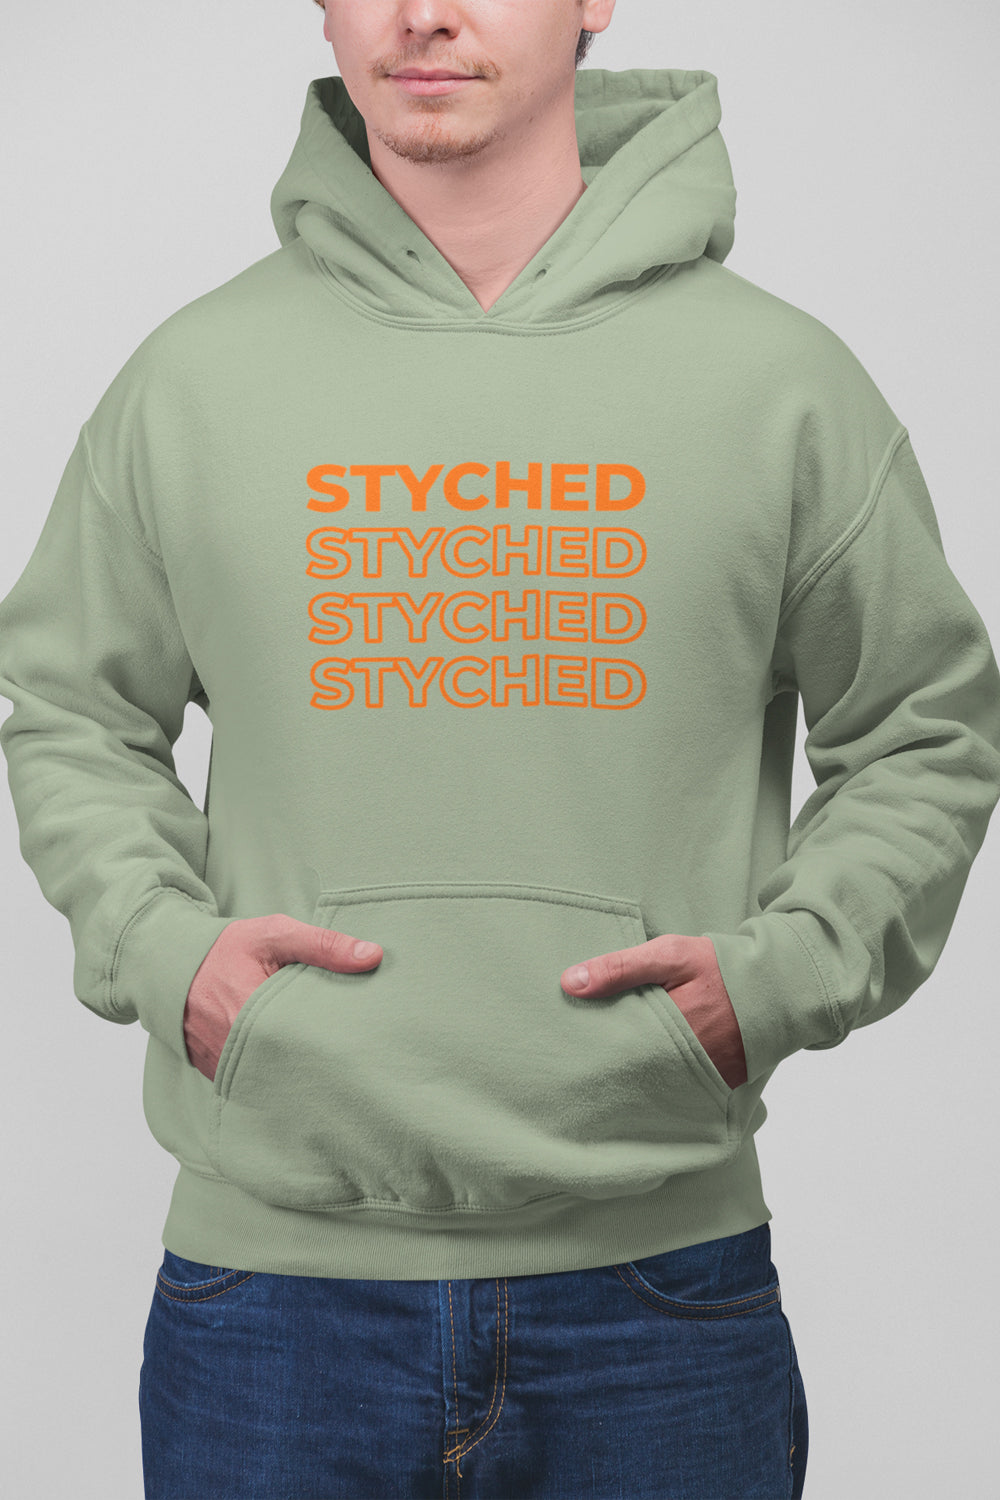 Styched Printed Premium Non Zipper Pastel Green Hoodie